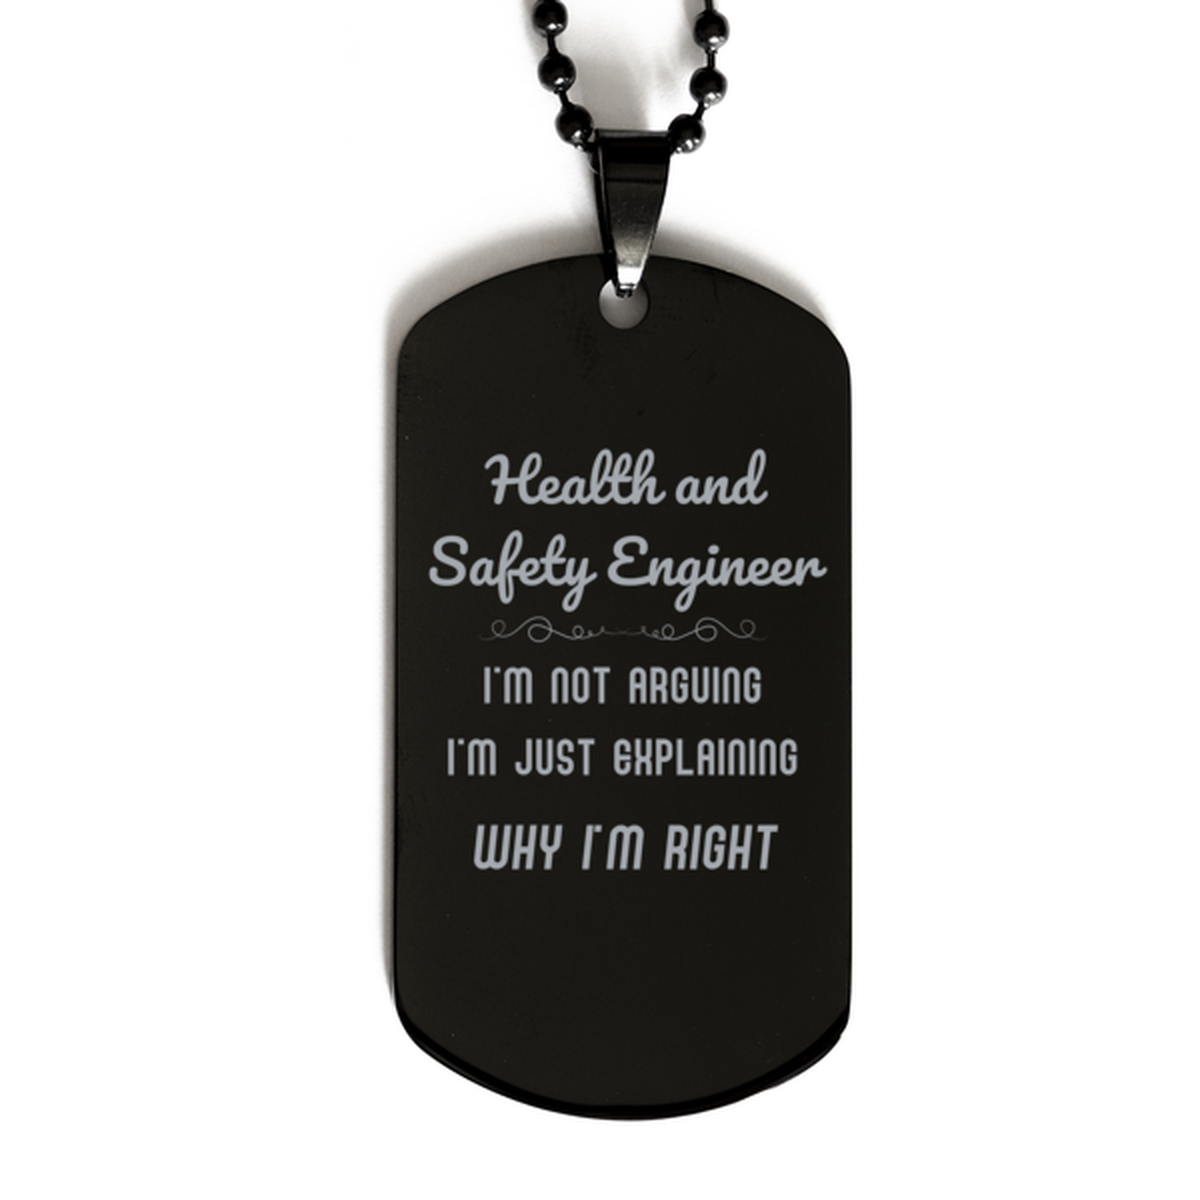 Health and Safety Engineer I'm not Arguing. I'm Just Explaining Why I'm RIGHT Black Dog Tag, Funny Saying Quote Health and Safety Engineer Gifts For Health and Safety Engineer Graduation Birthday Christmas Gifts for Men Women Coworker